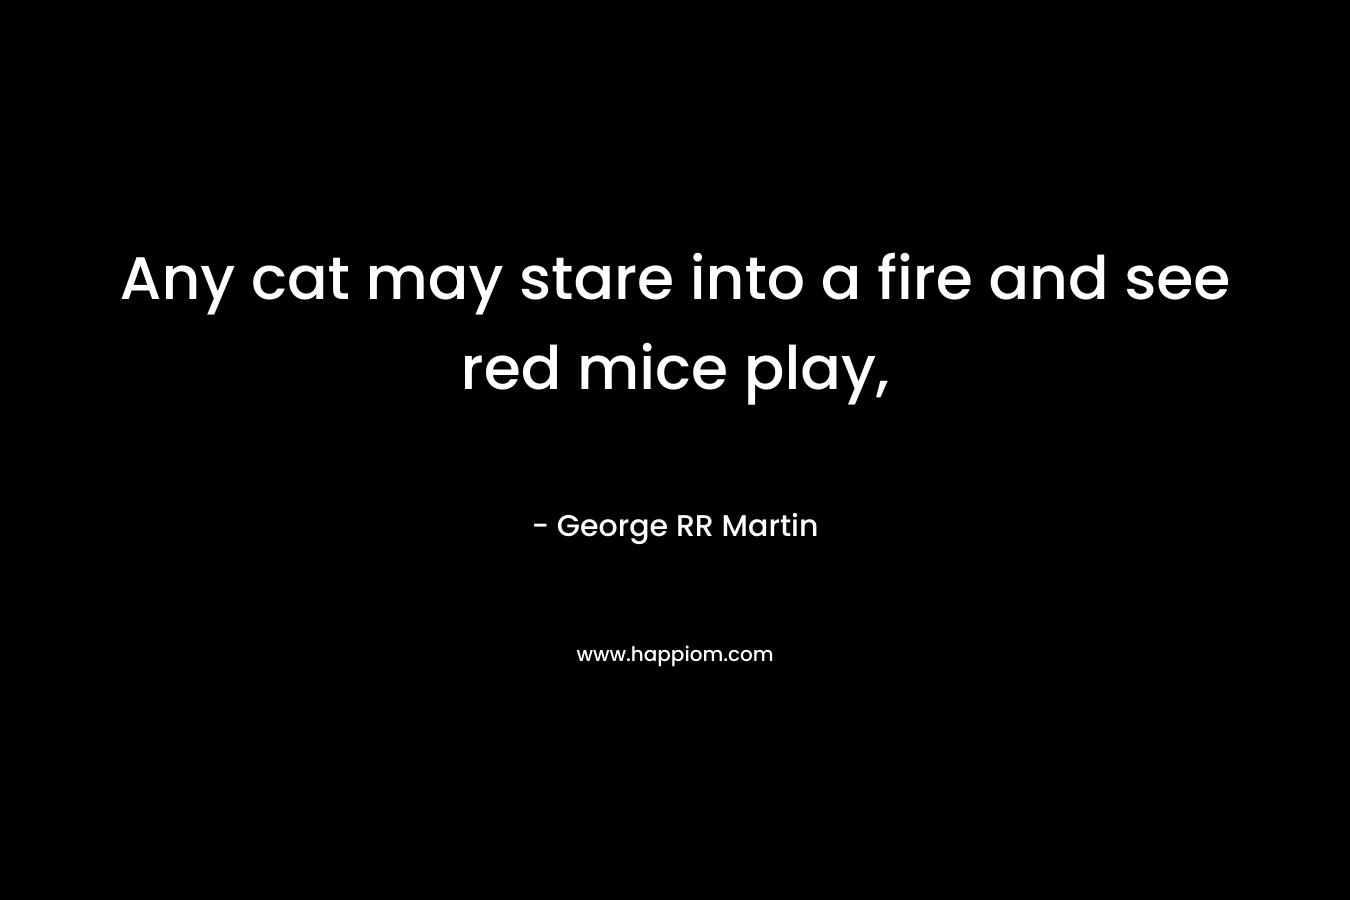 Any cat may stare into a fire and see red mice play, – George RR Martin